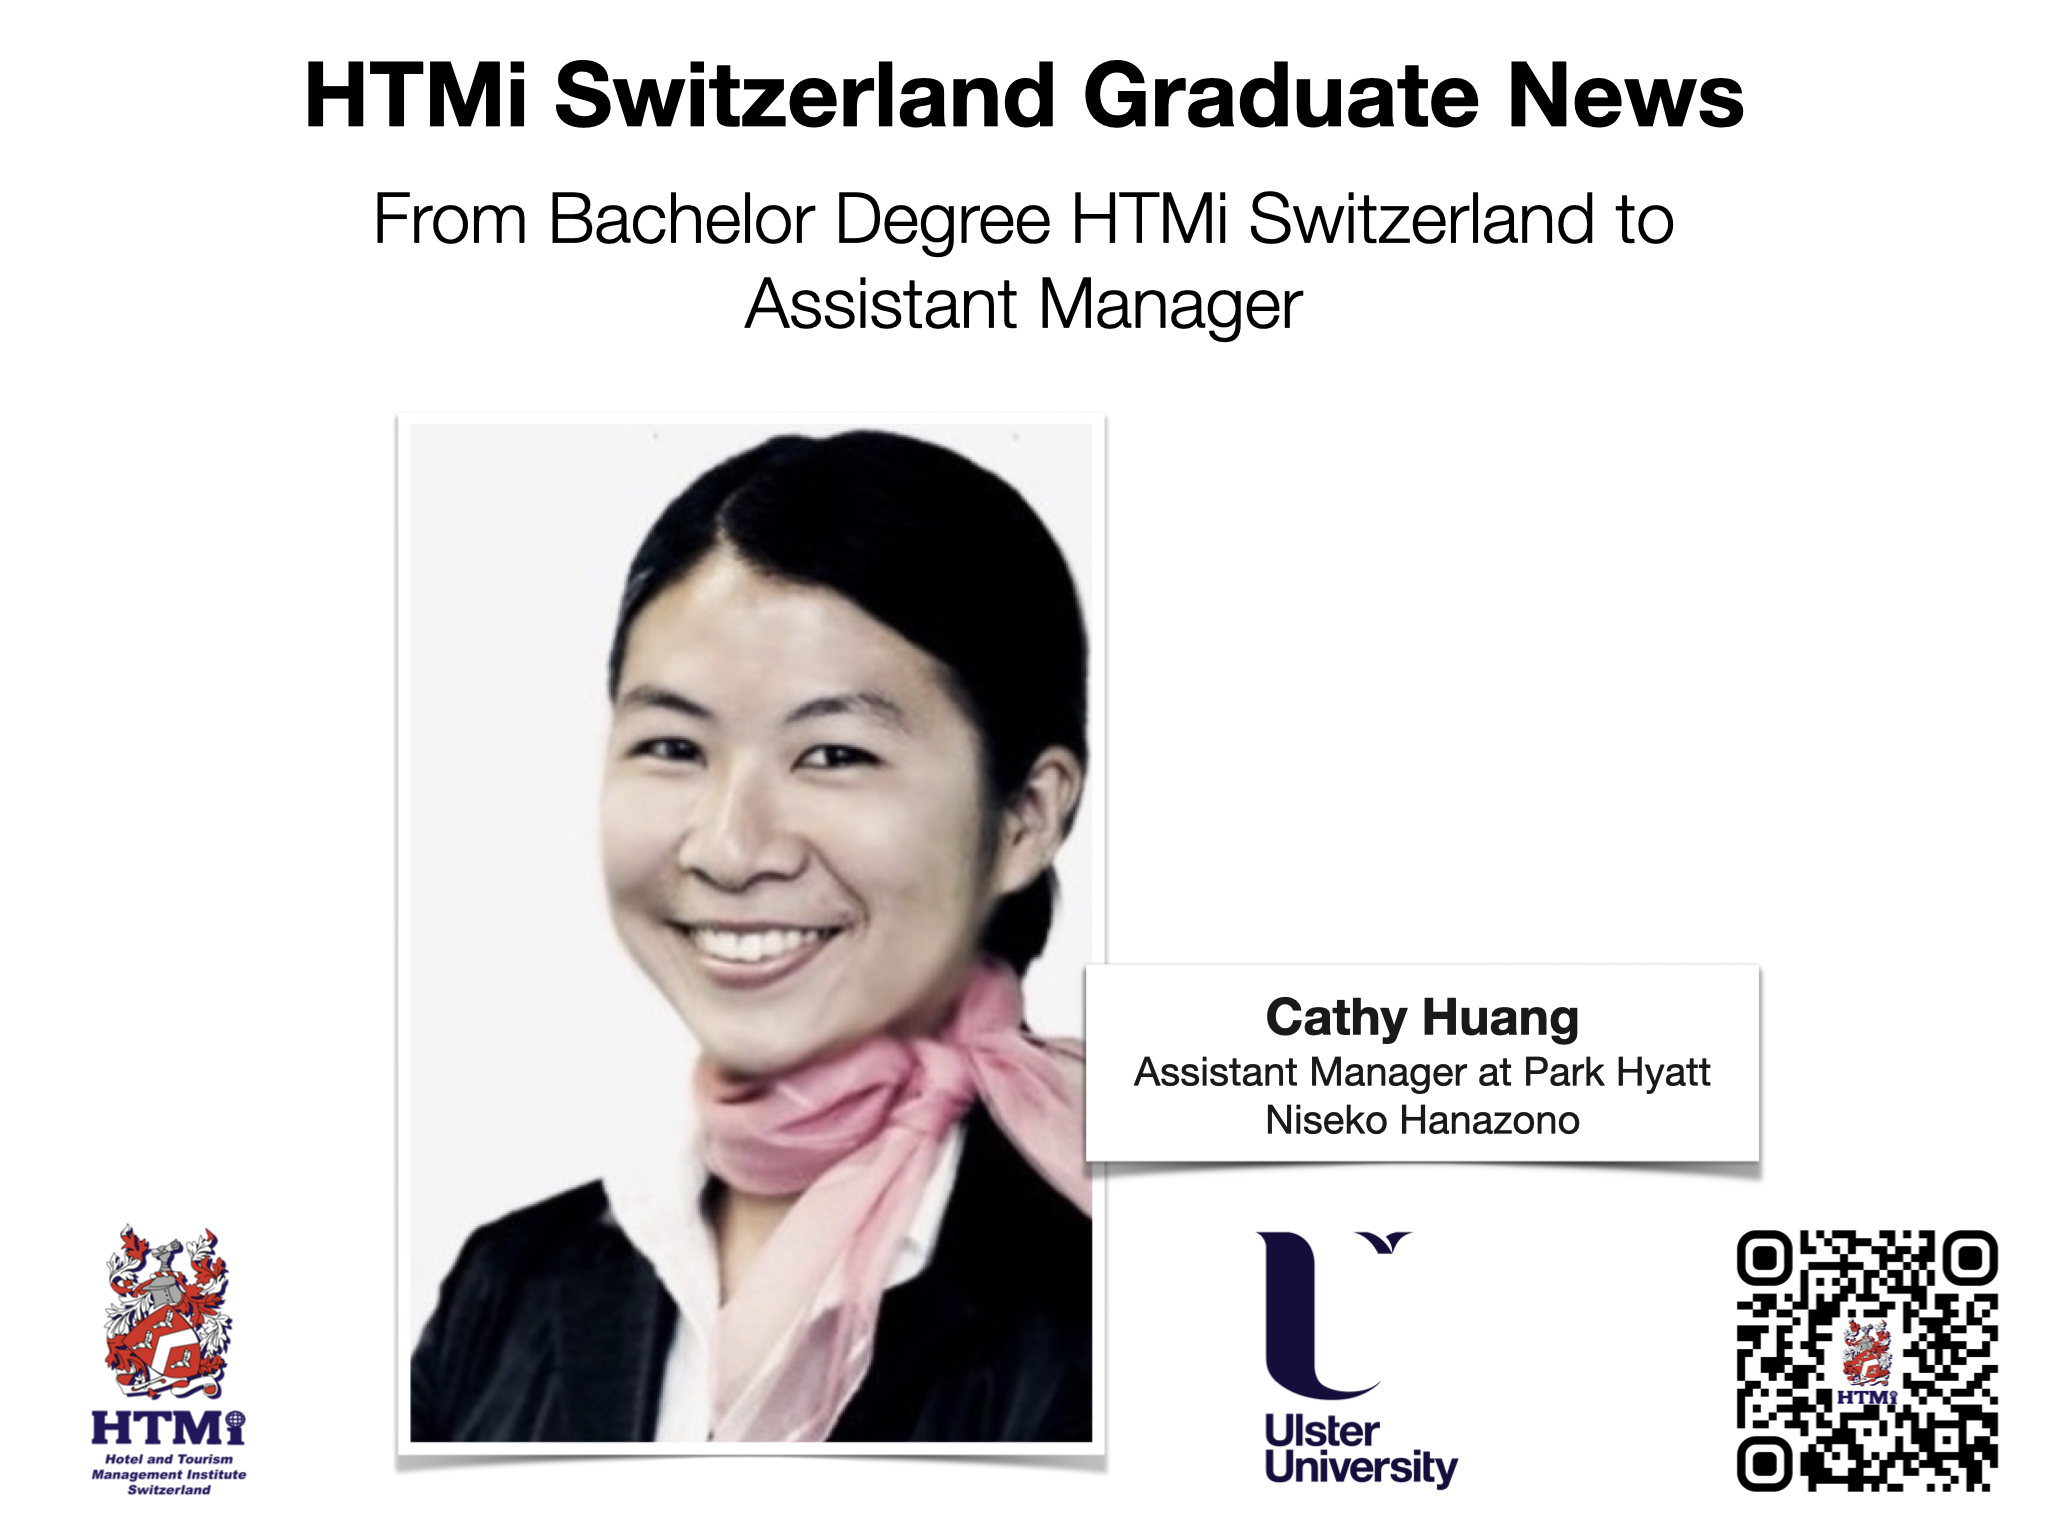 Cathy Huang - From Bachelor Degree HTMi Switzerland to Assistant Manager - HTMi Switzerland Graduate News